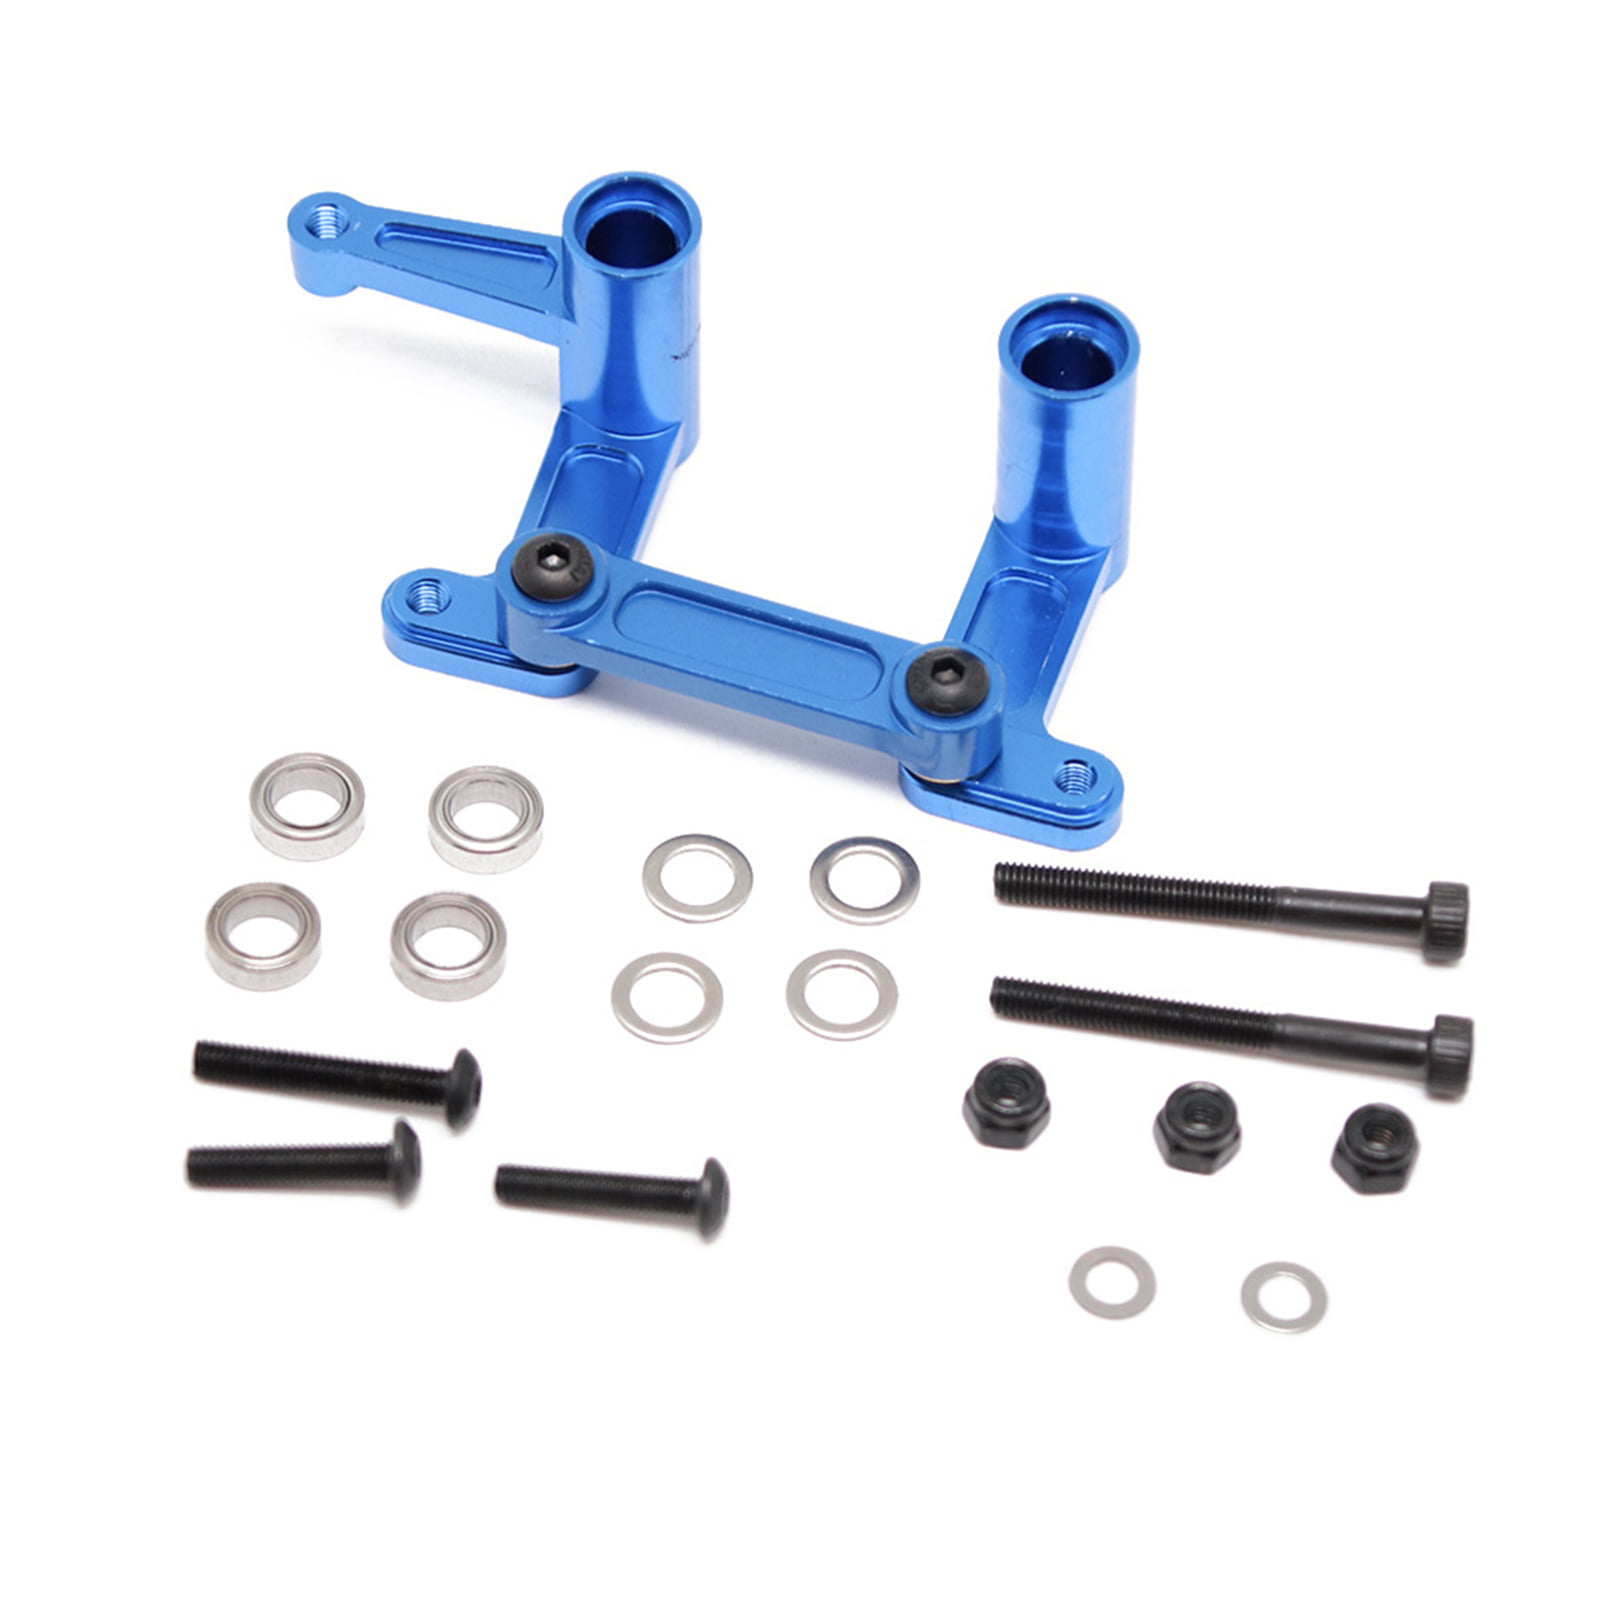 RC 1:10 Alloy Steering Bellcrank Set Blue Replacement for Traxxas Slash 2WD 